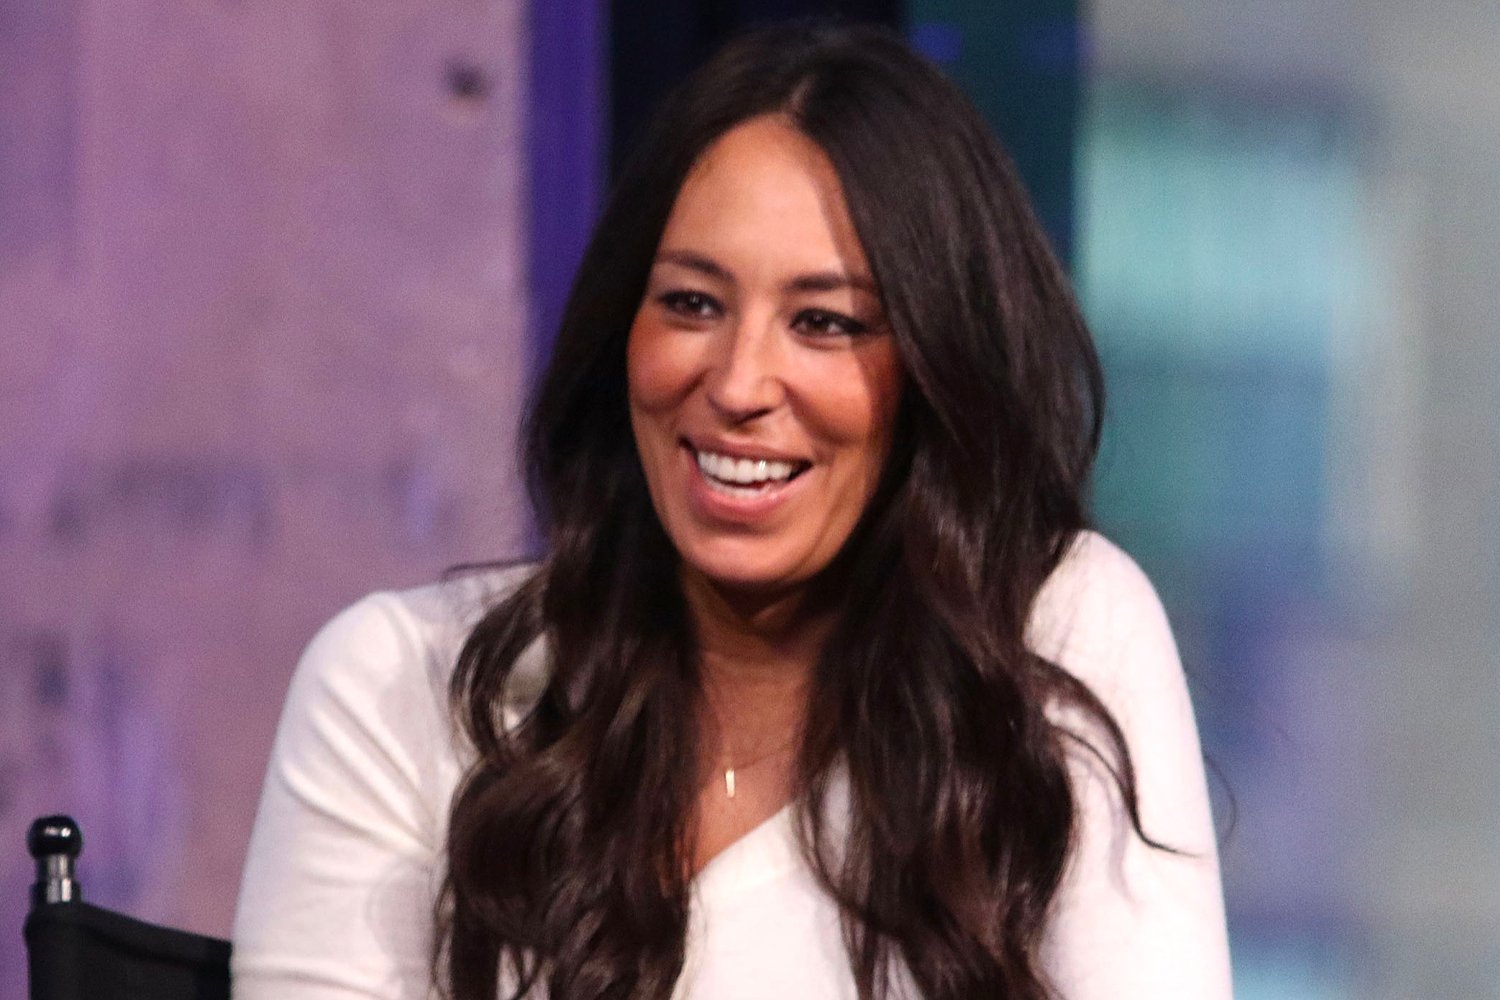 Joanna Gaines Introduces Earle, a Staghorn Fern, and Fans Are Loving It